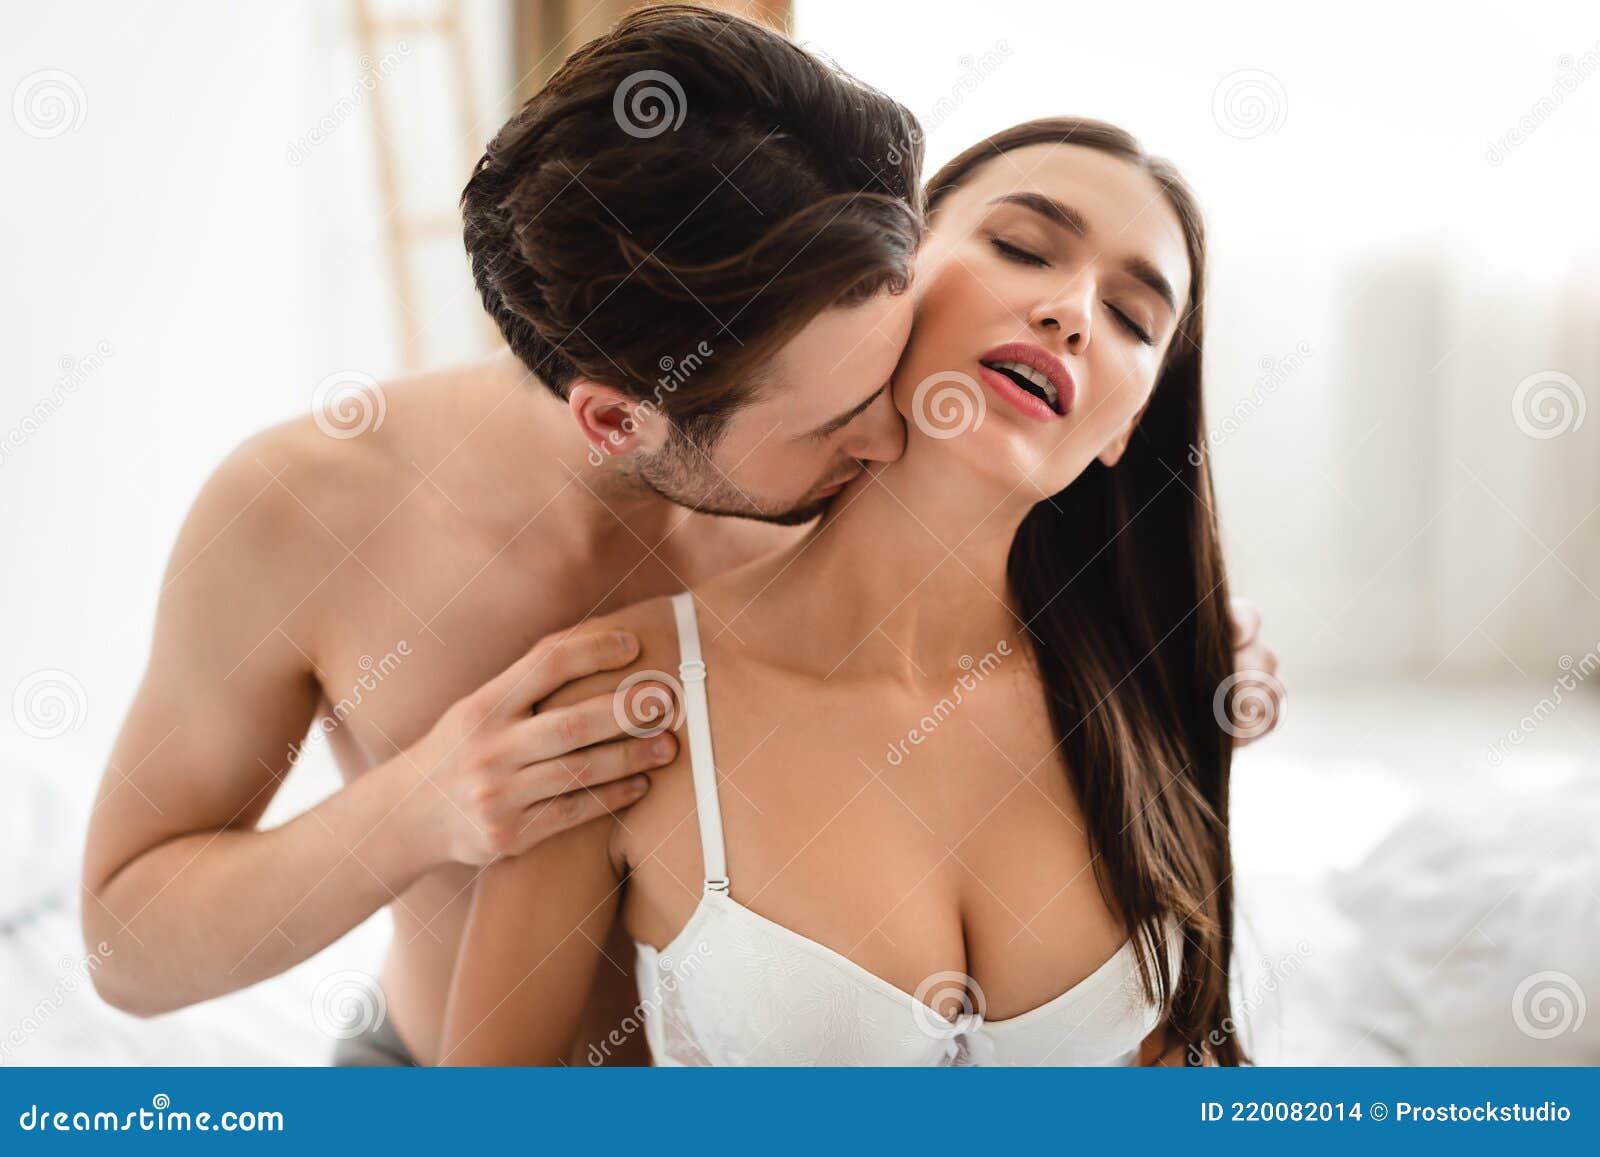 Passionate Man Kissing Womanand X27;s Neck Having Sex in Bedroom Indoors Stock Photo